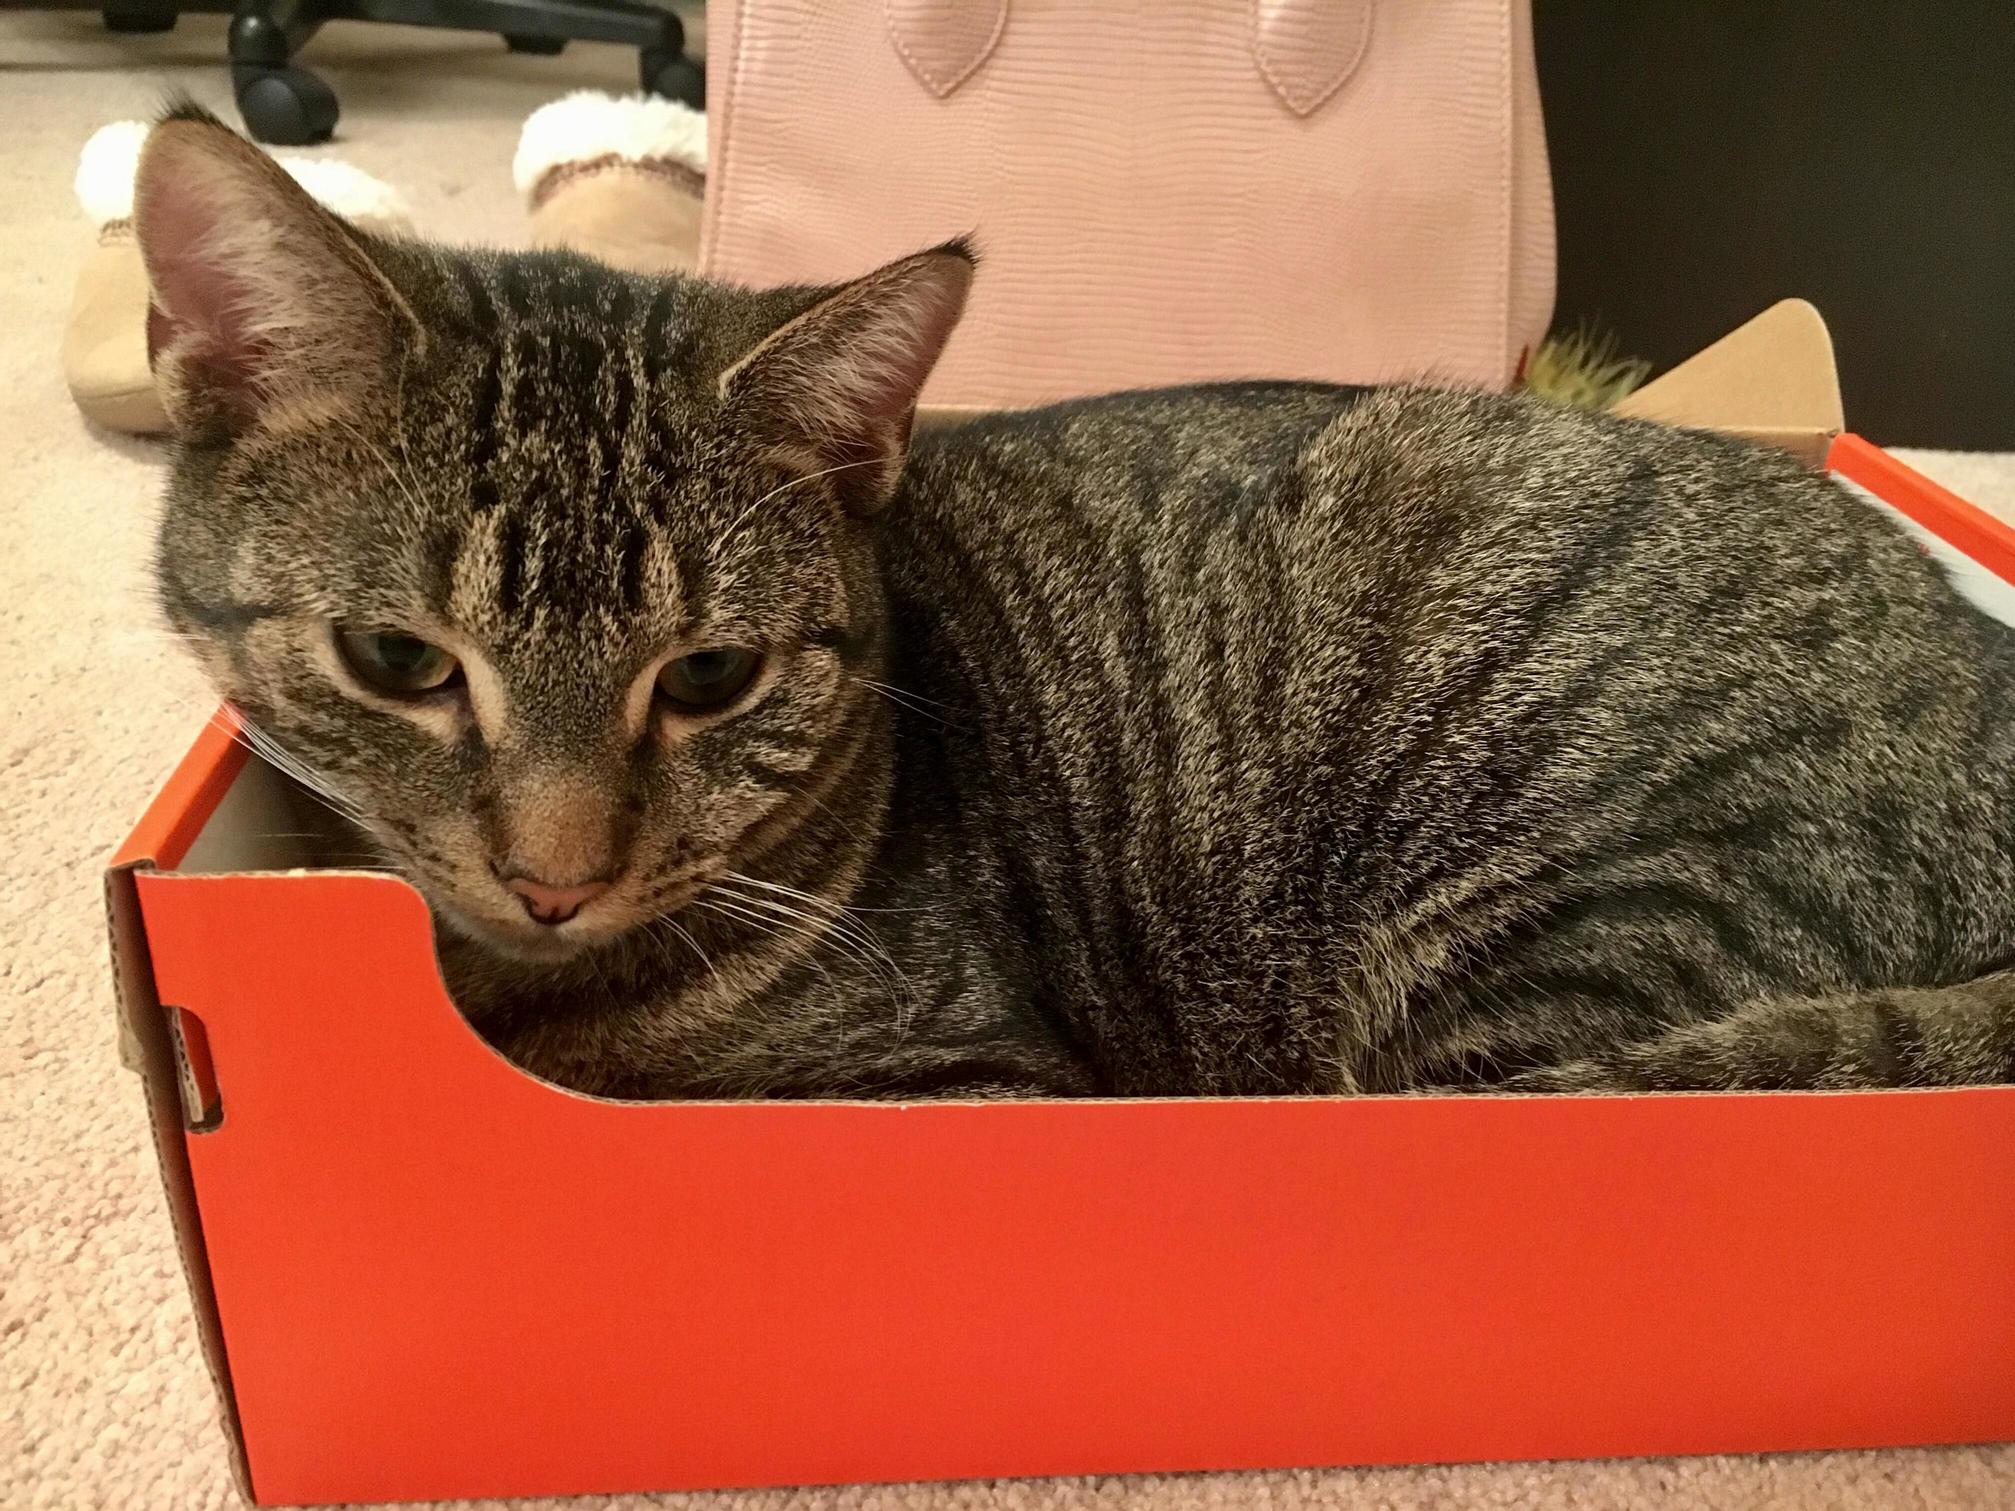 I have a perfectly nice bed for my cat but he prefers a shoebox